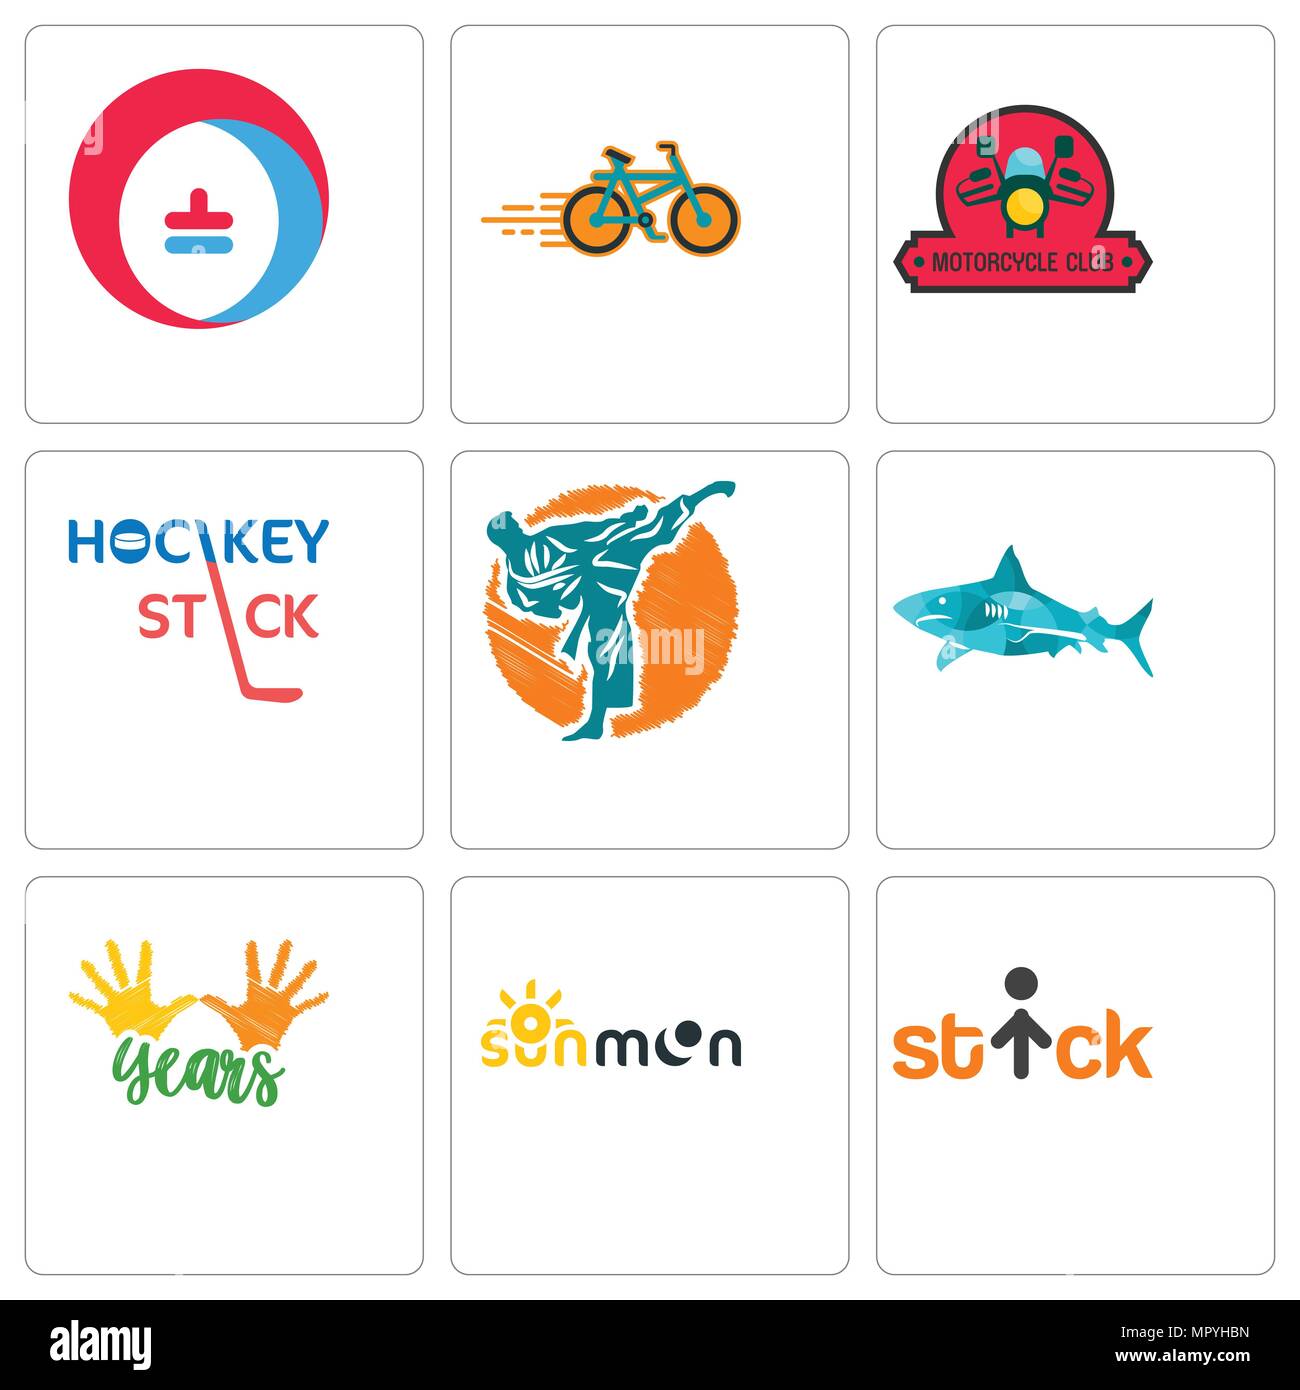 Set Of 9 simple editable icons such as stick figure, sun moon, 10 years, sharks, martial arts, hockey stick, motorcycle club, bike shop, heating cooli Stock Vector